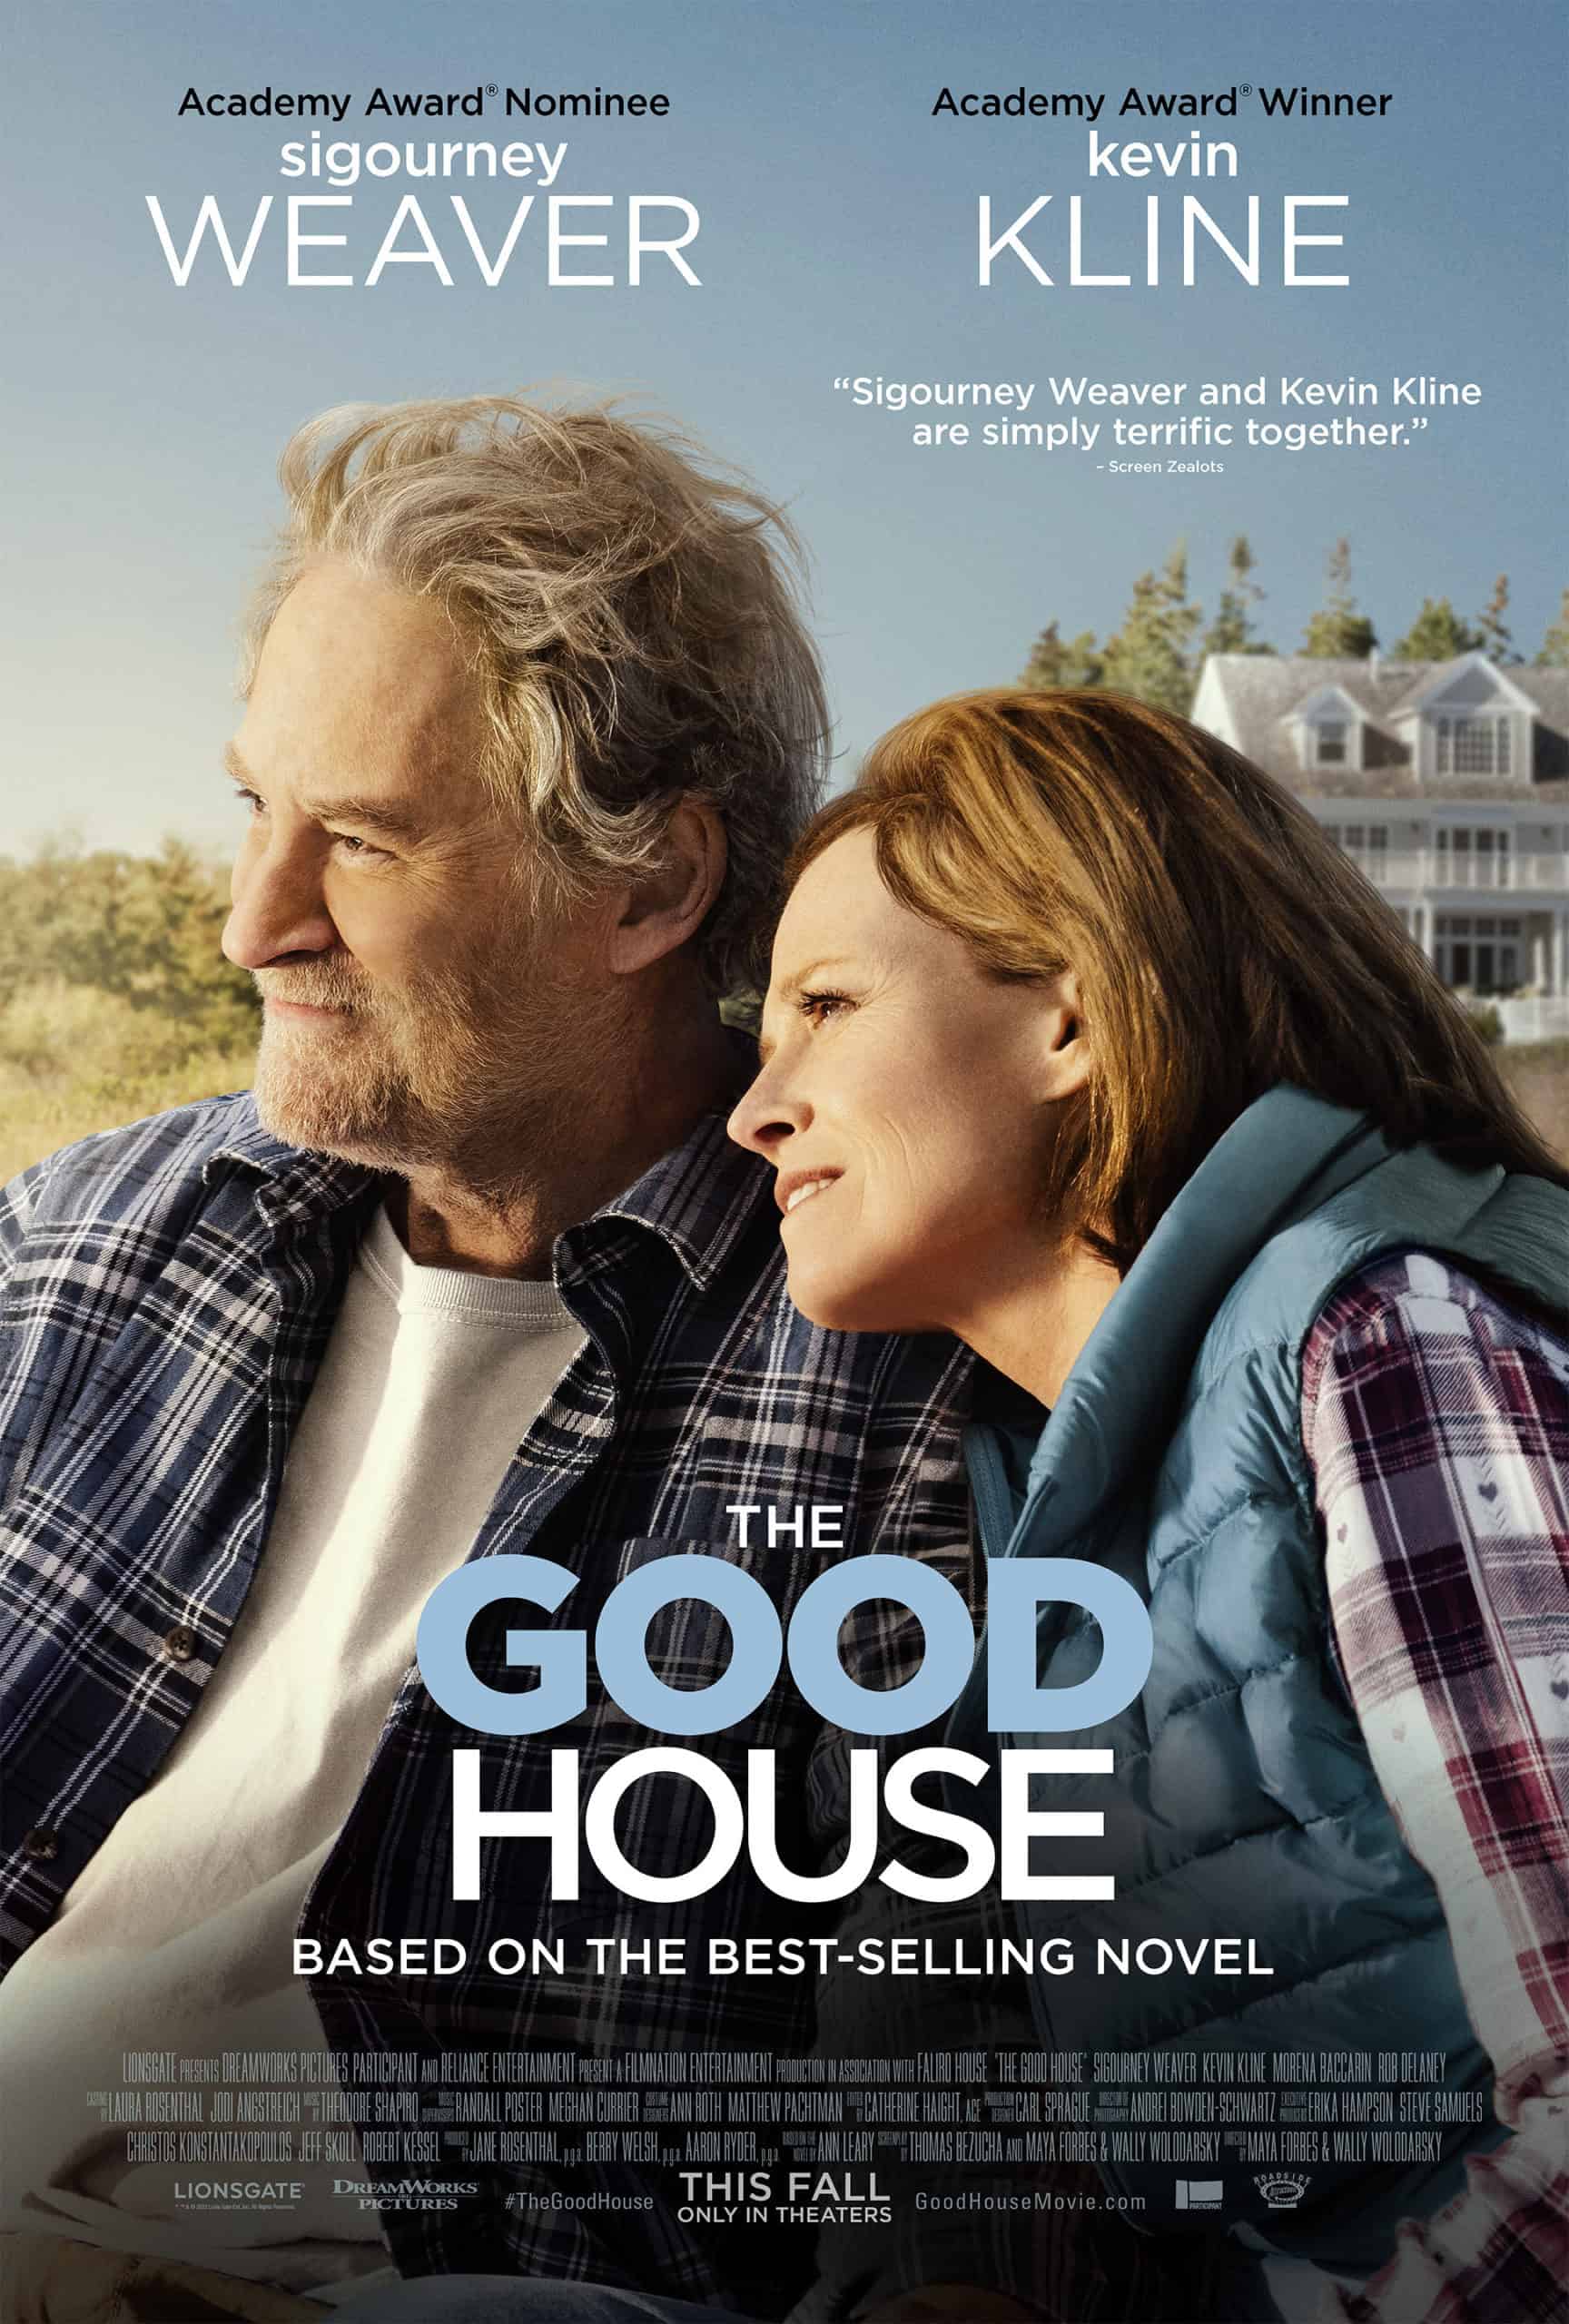 The Good House Review